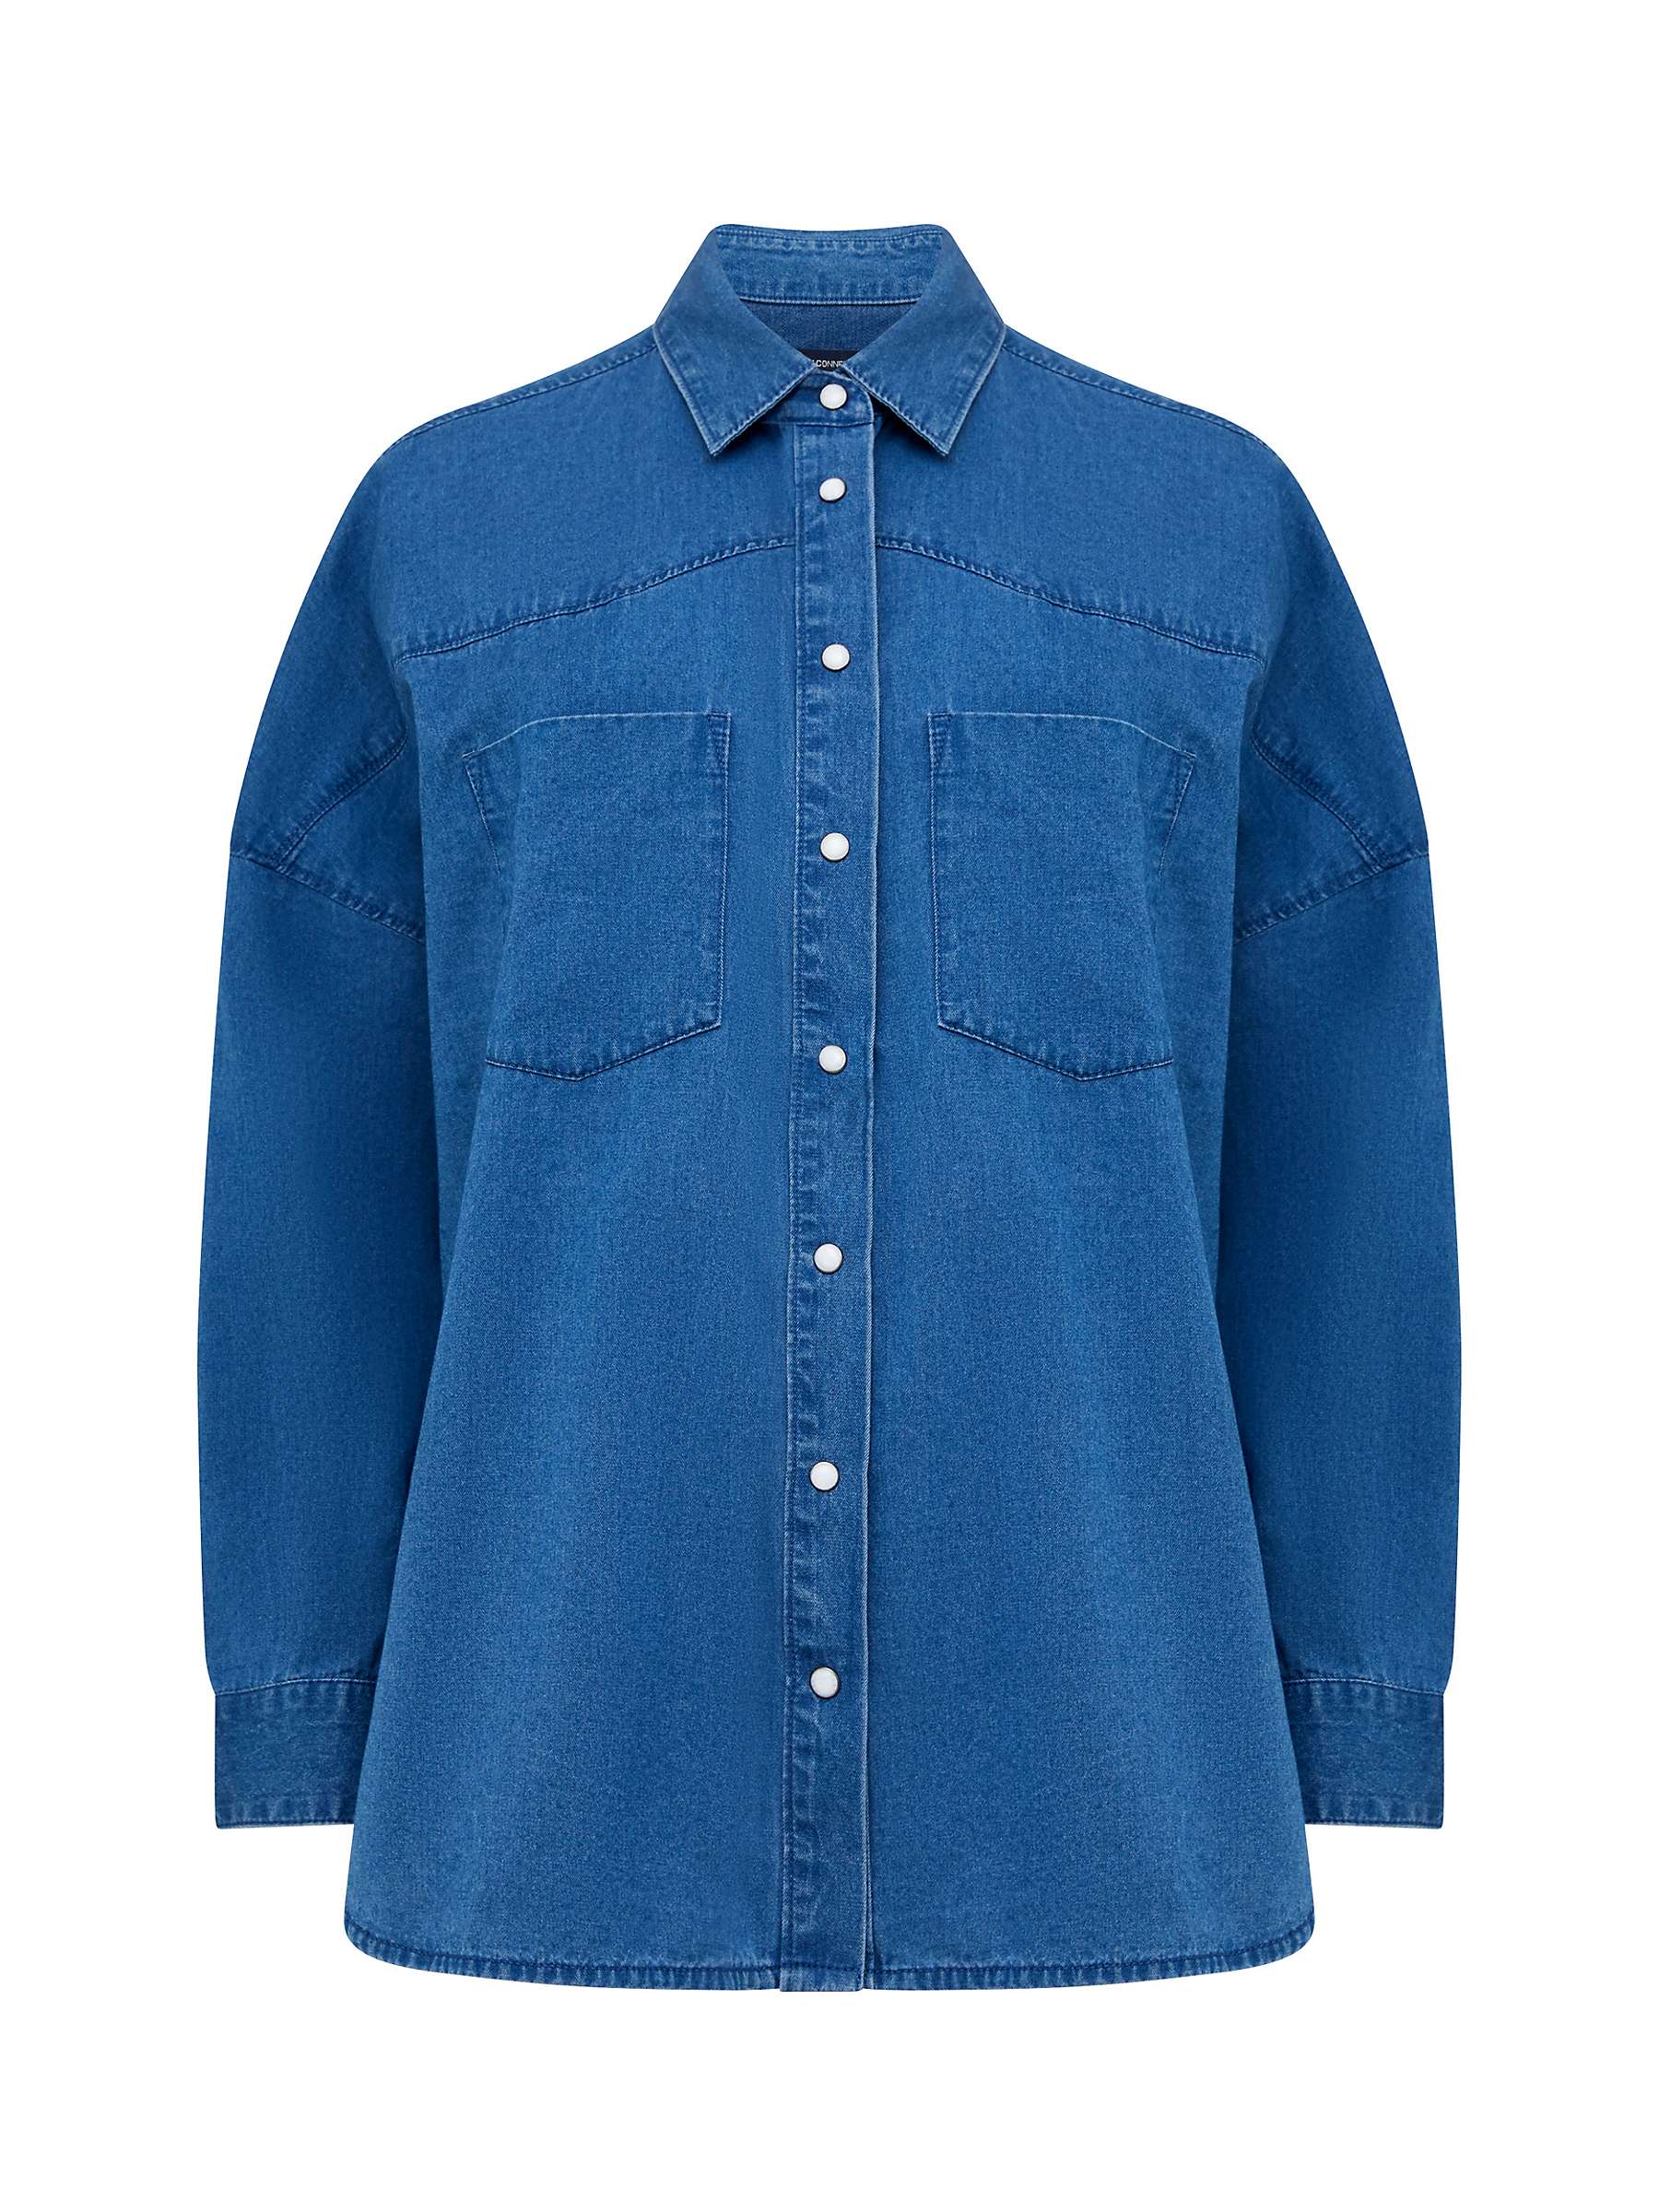 Buy French Connection Zaves Chambray Shirt, Light Vintage Online at johnlewis.com